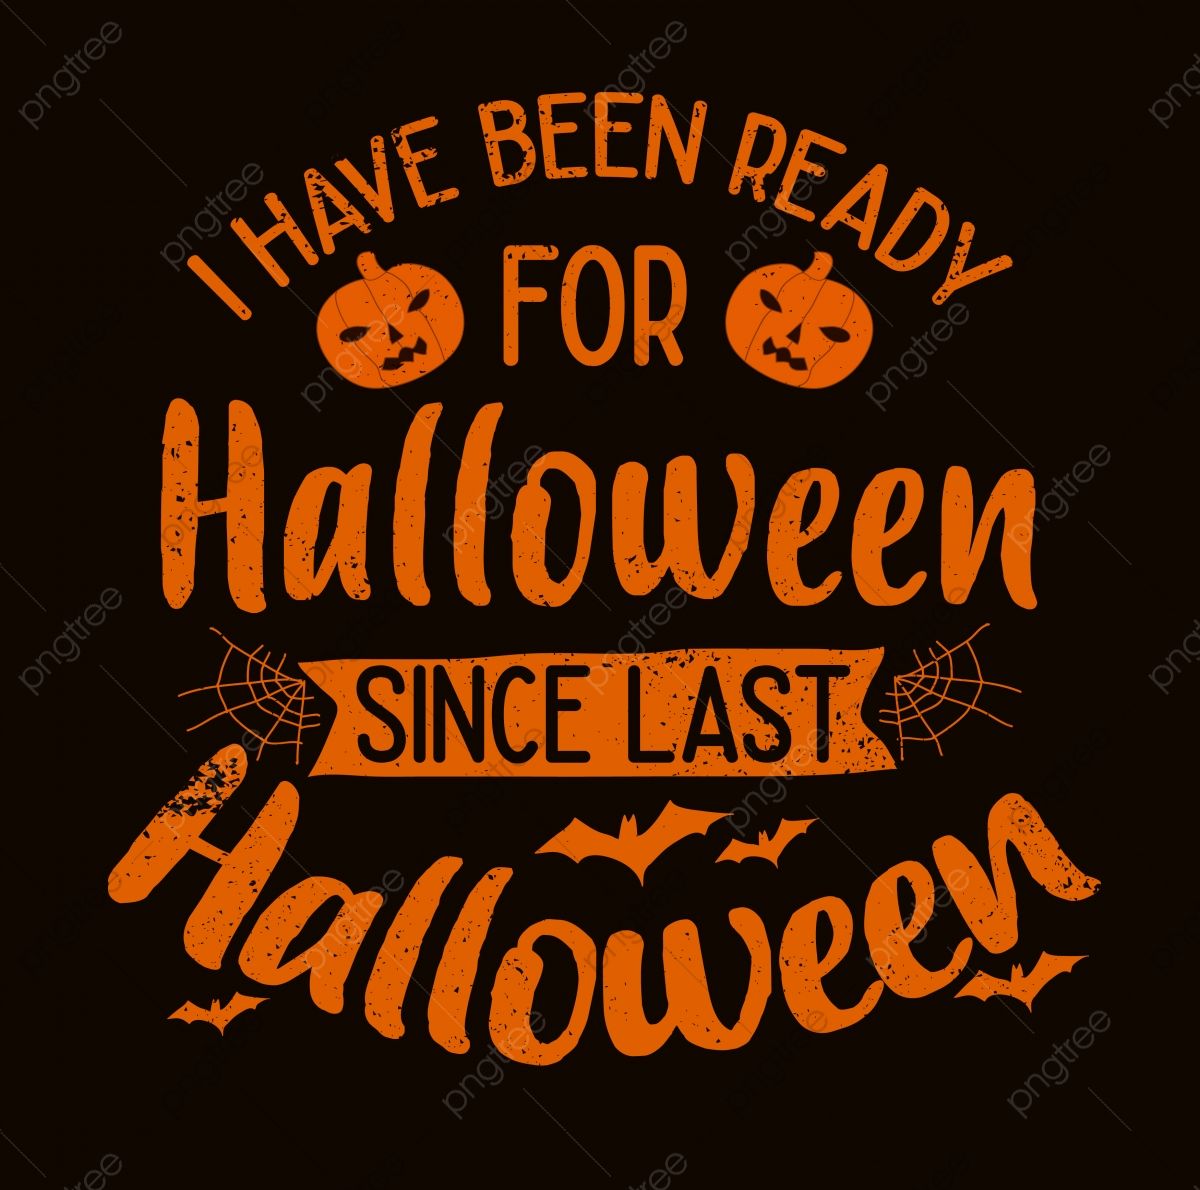 Funny Saying About Halloween Quotes I Have Been Ready For Halloween Since Last Halloween Font Effect EPS For Free Download